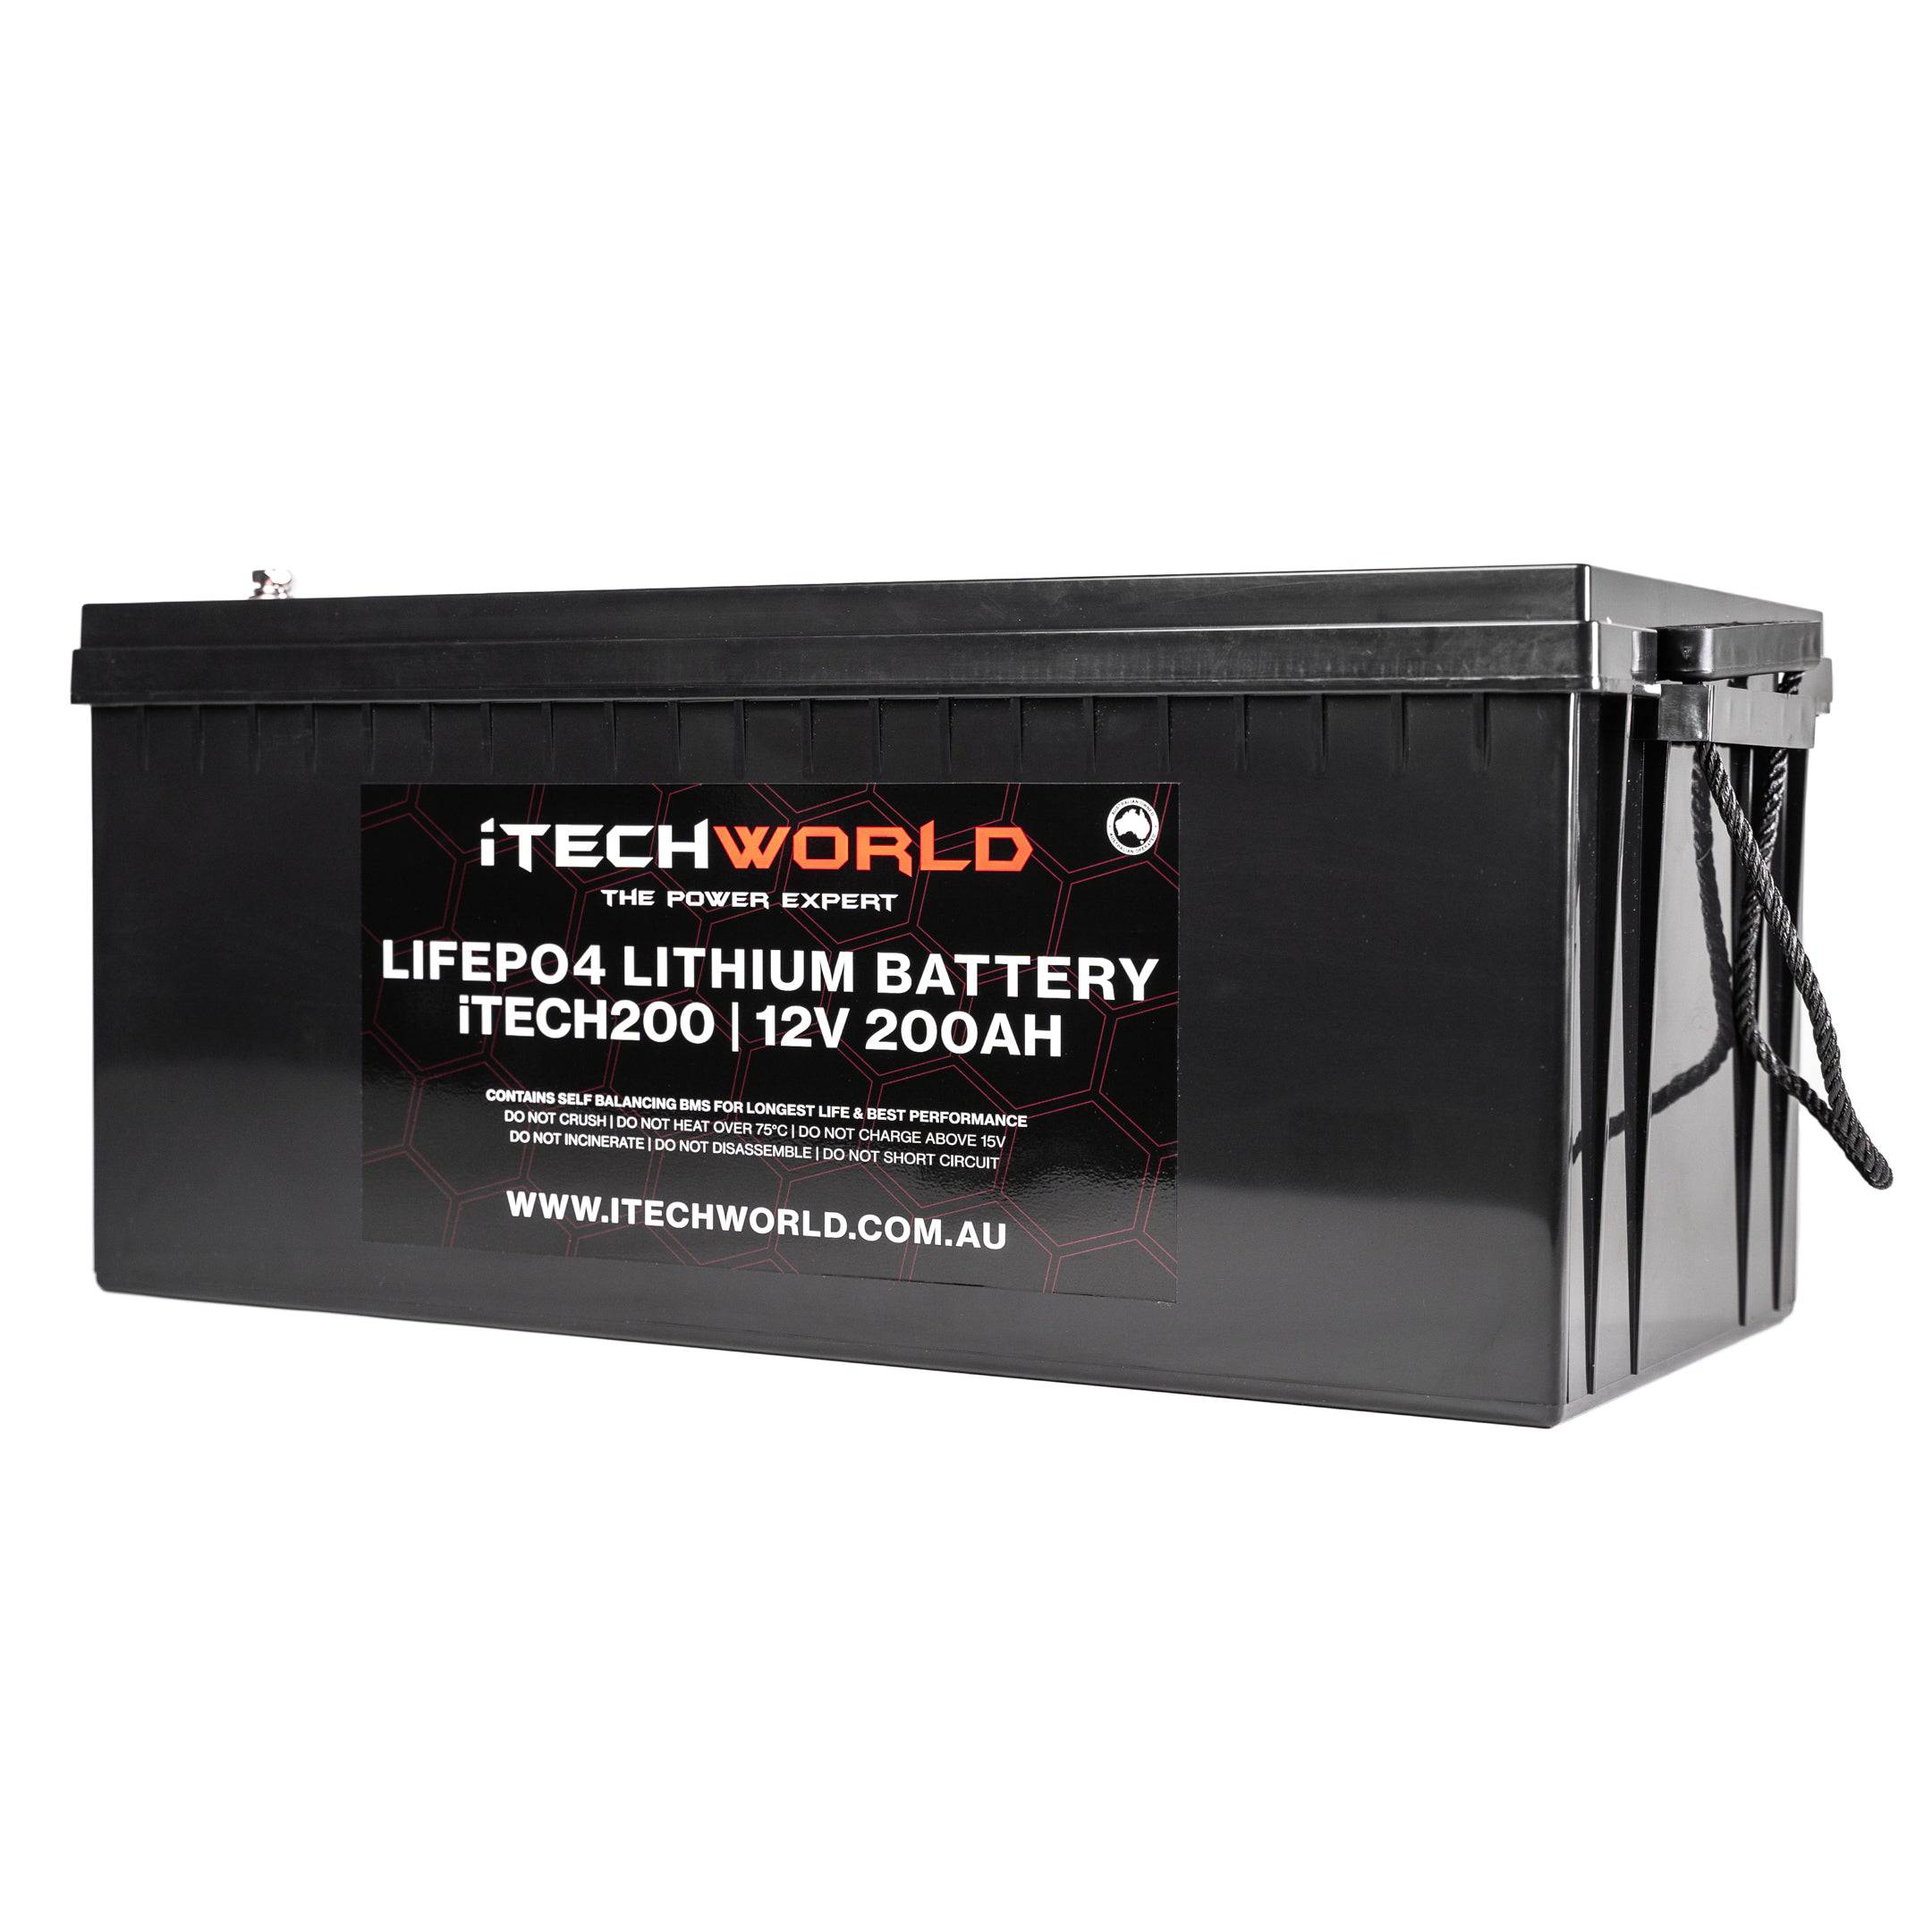 Drop in replacement 200 amp lithium ion battery